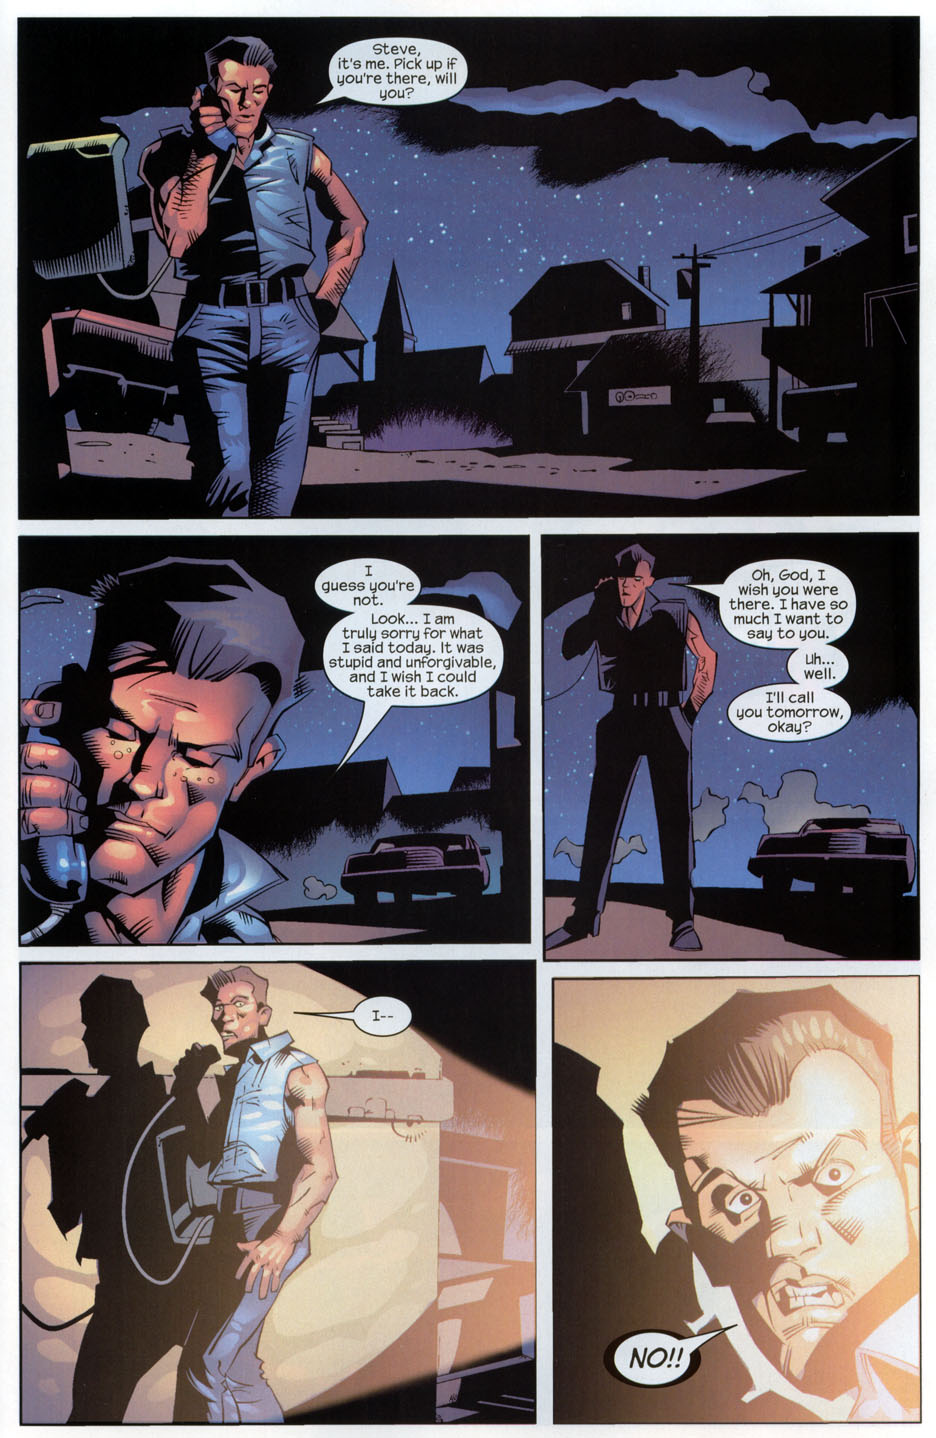 The Punisher (2001) issue 29 - Streets of Laredo #02 - Page 20